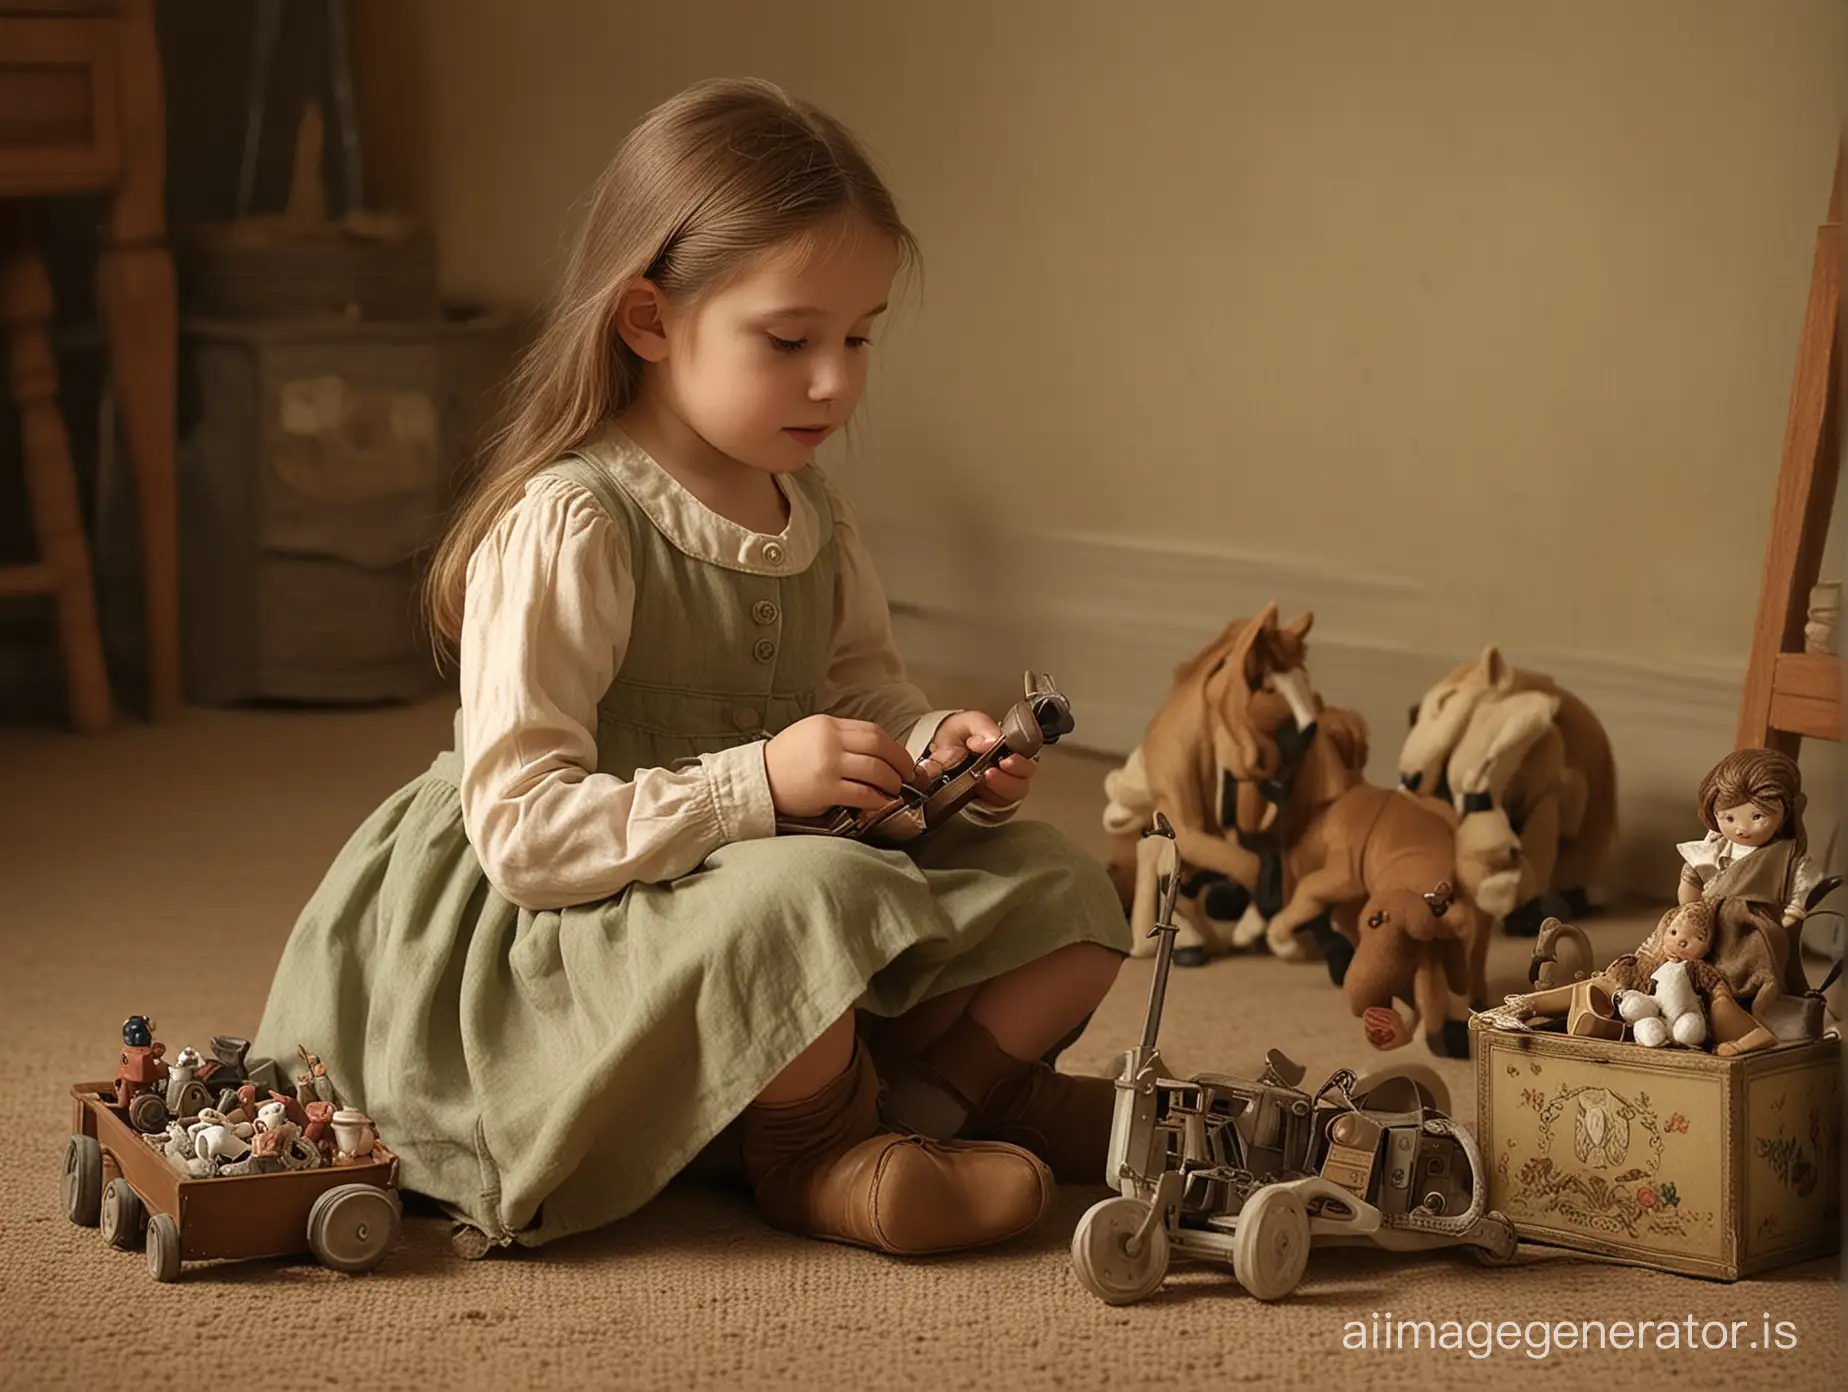 Nostalgic-Childhood-Moments-Girl-Playing-with-Vintage-Toys